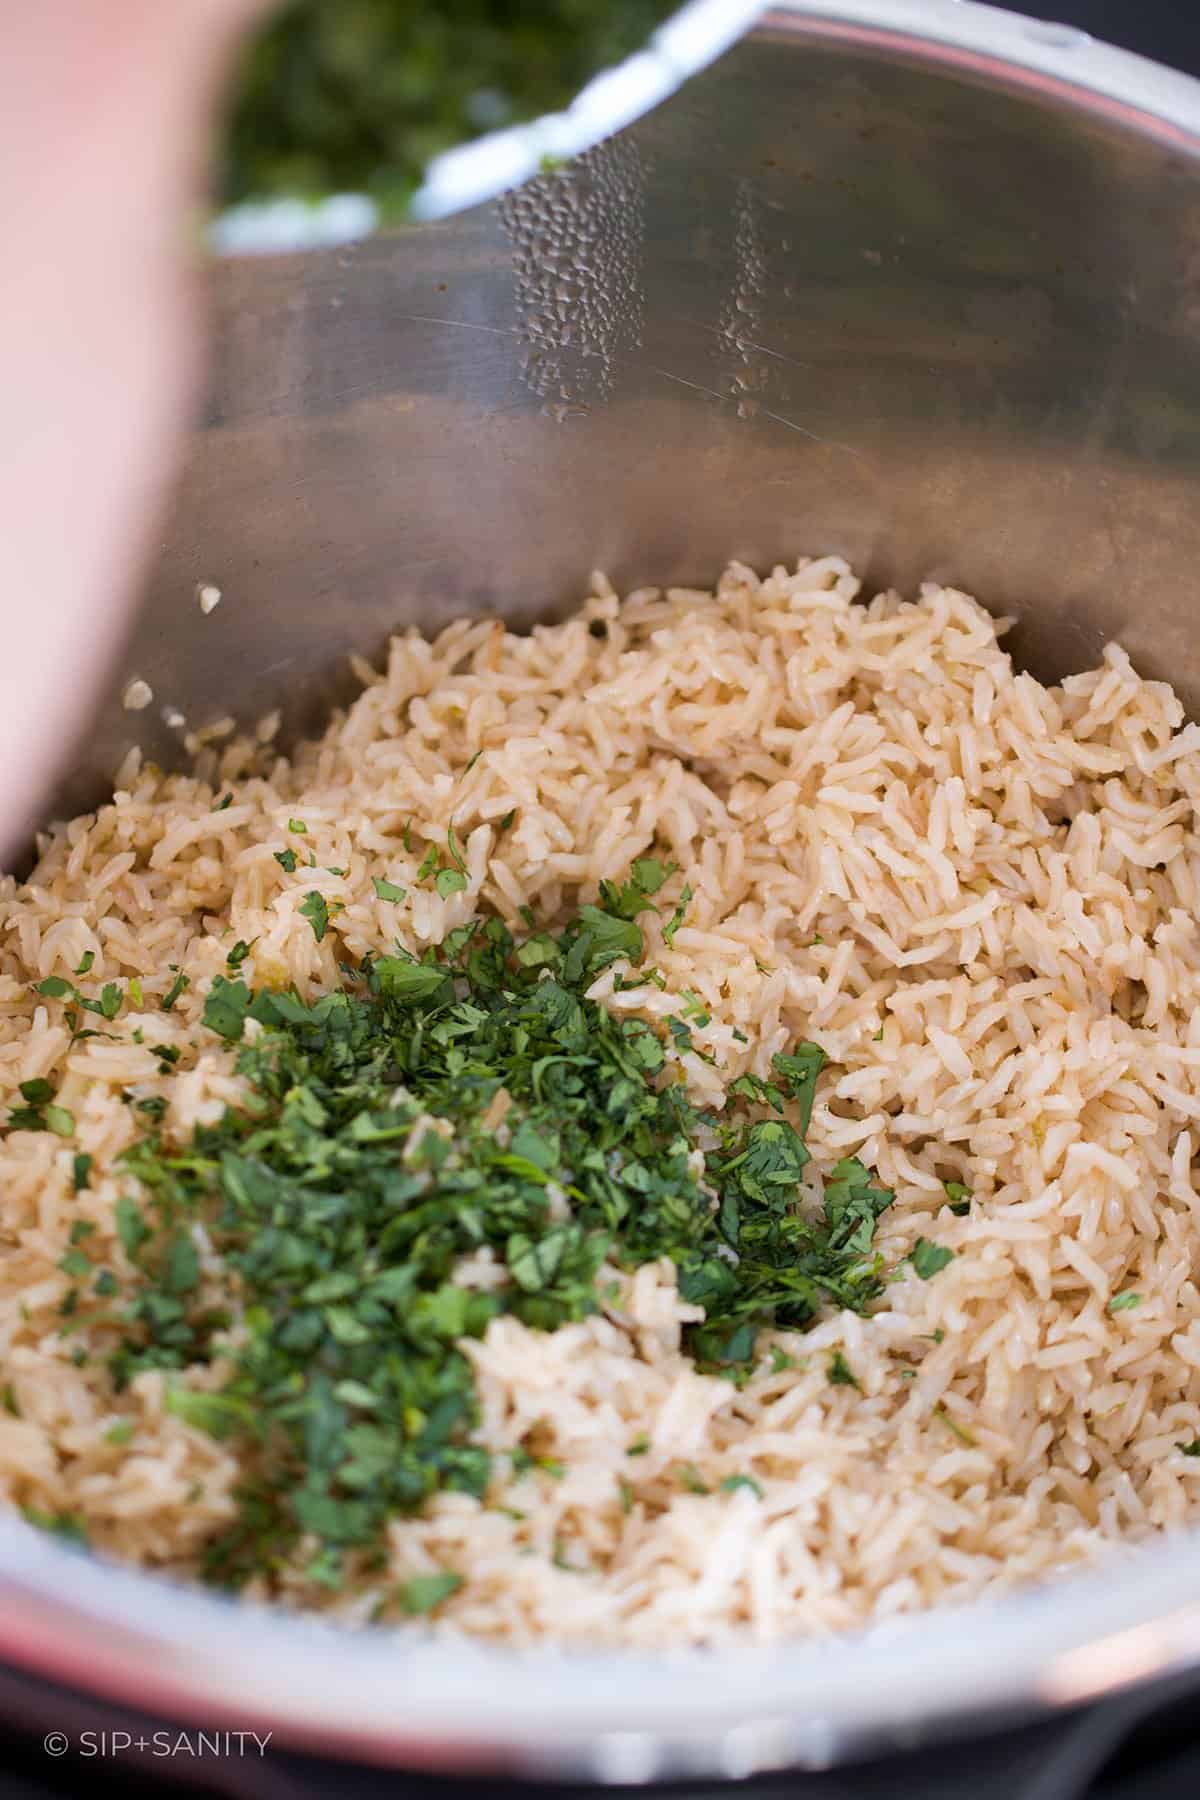 Cilantro being added to cooked brown rice.